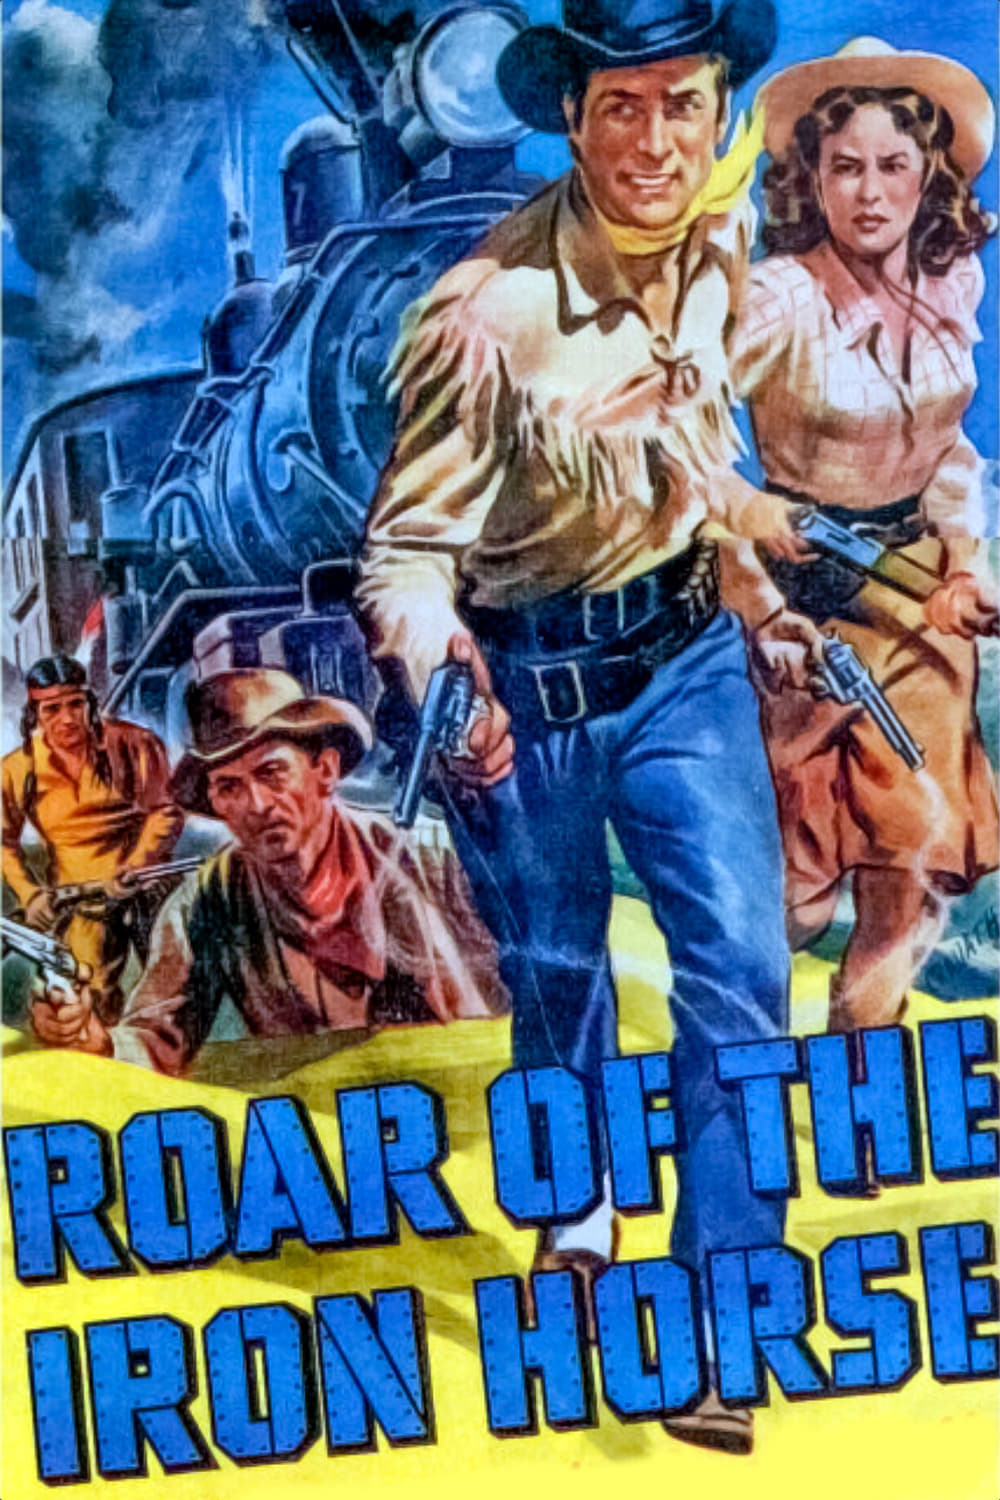 Roar of the Iron Horse (1951)